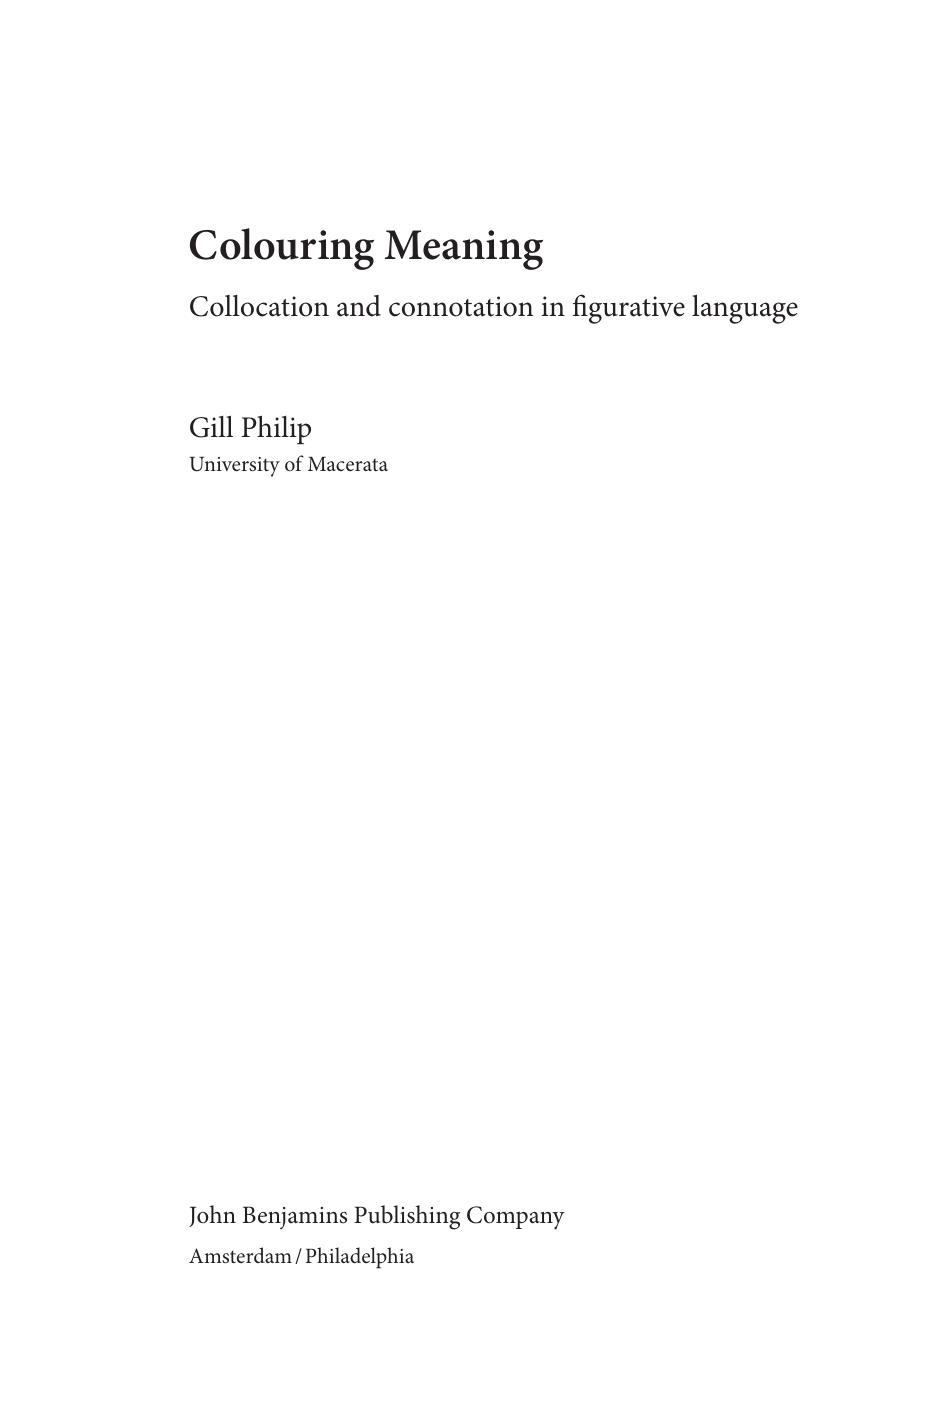 Colouring Meaning: Collocation and Connotation in Figurative Language